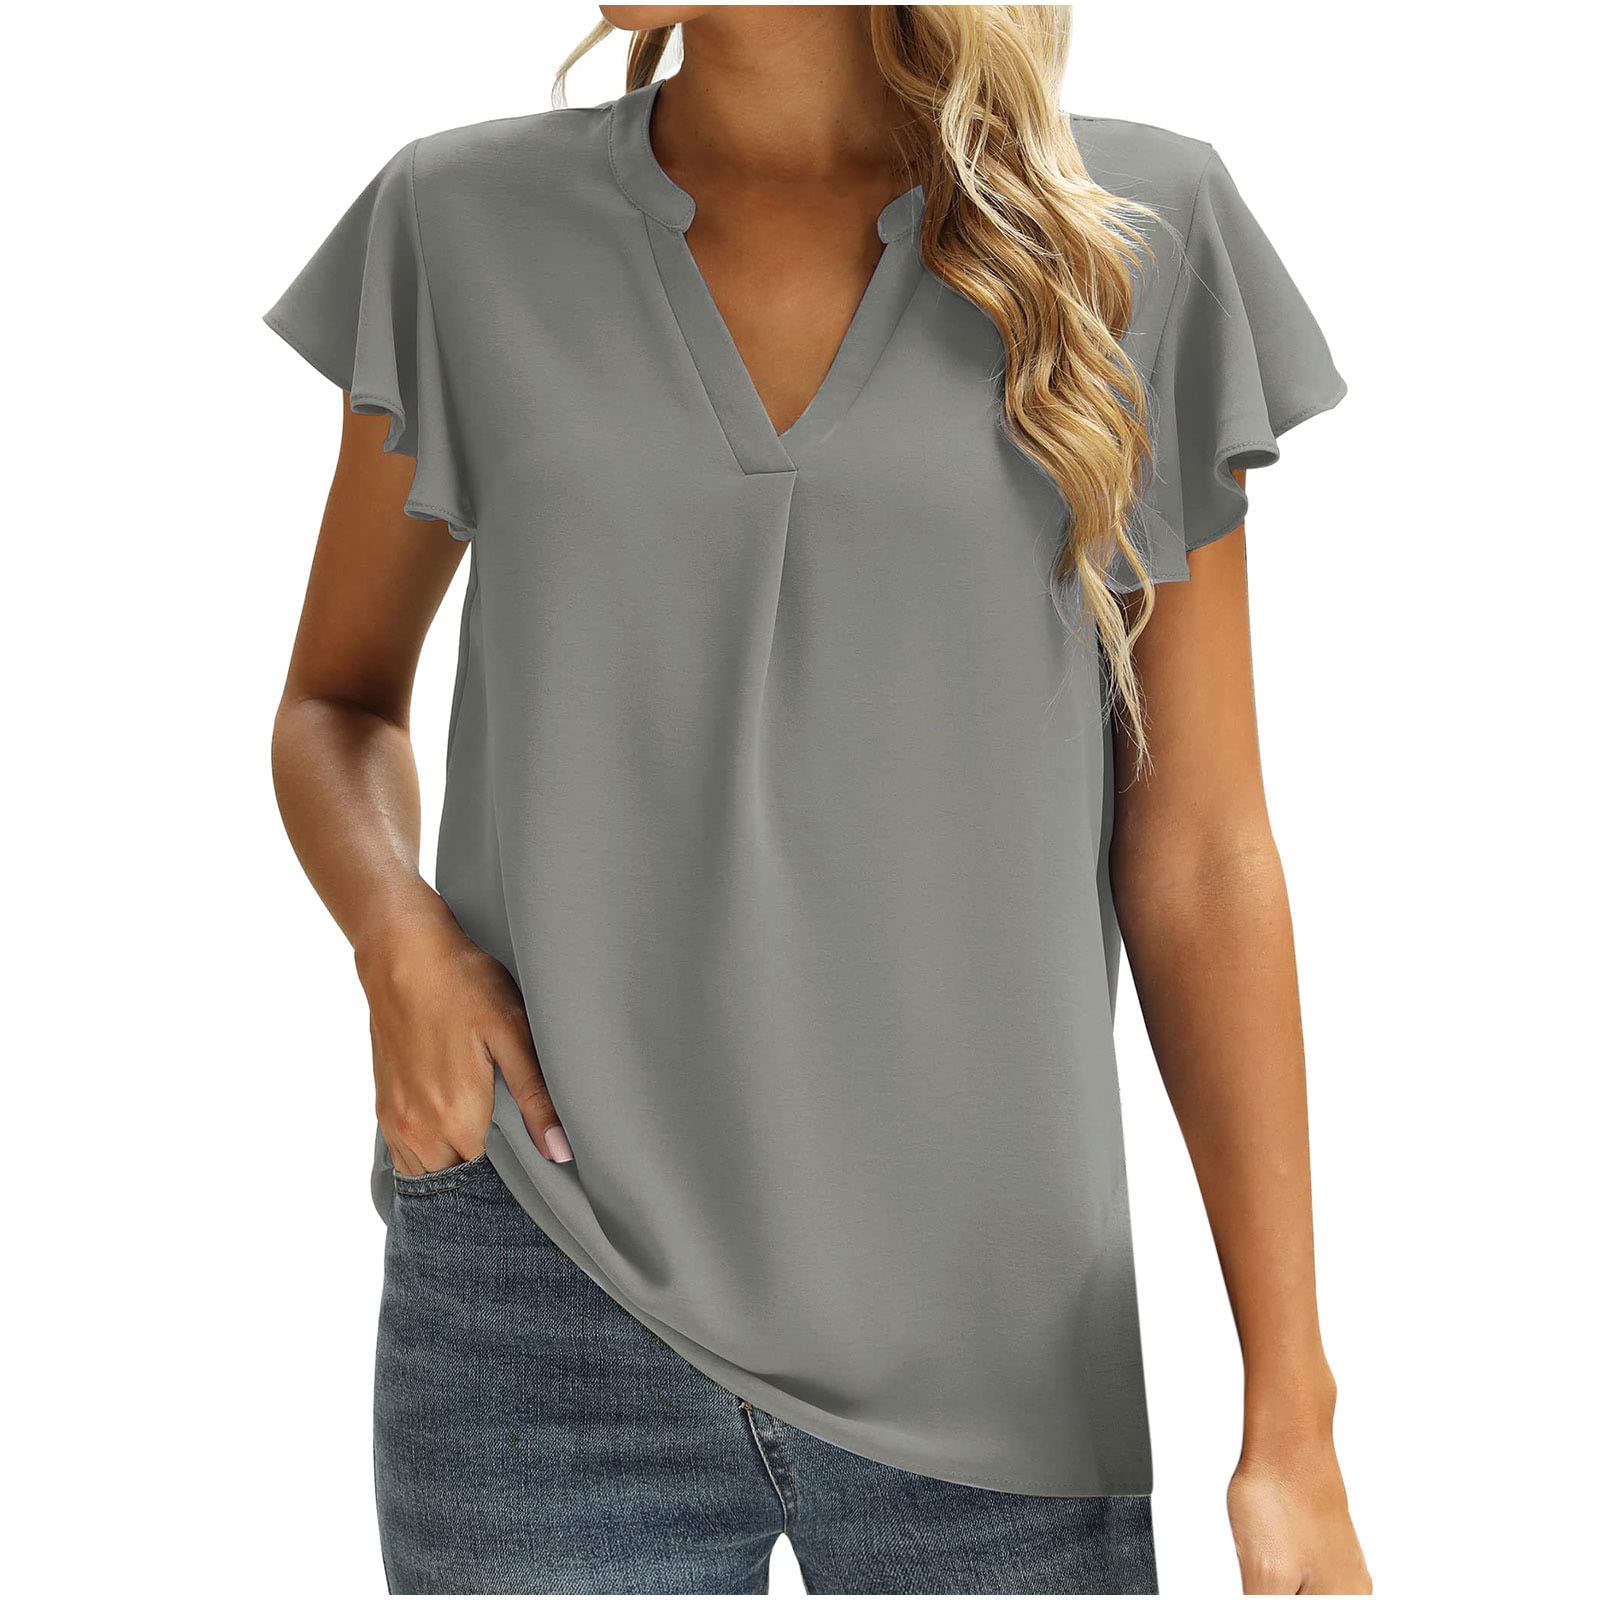 Women's Ruffle Short Sleeve Tops V Neck T-Shirts Solid Color